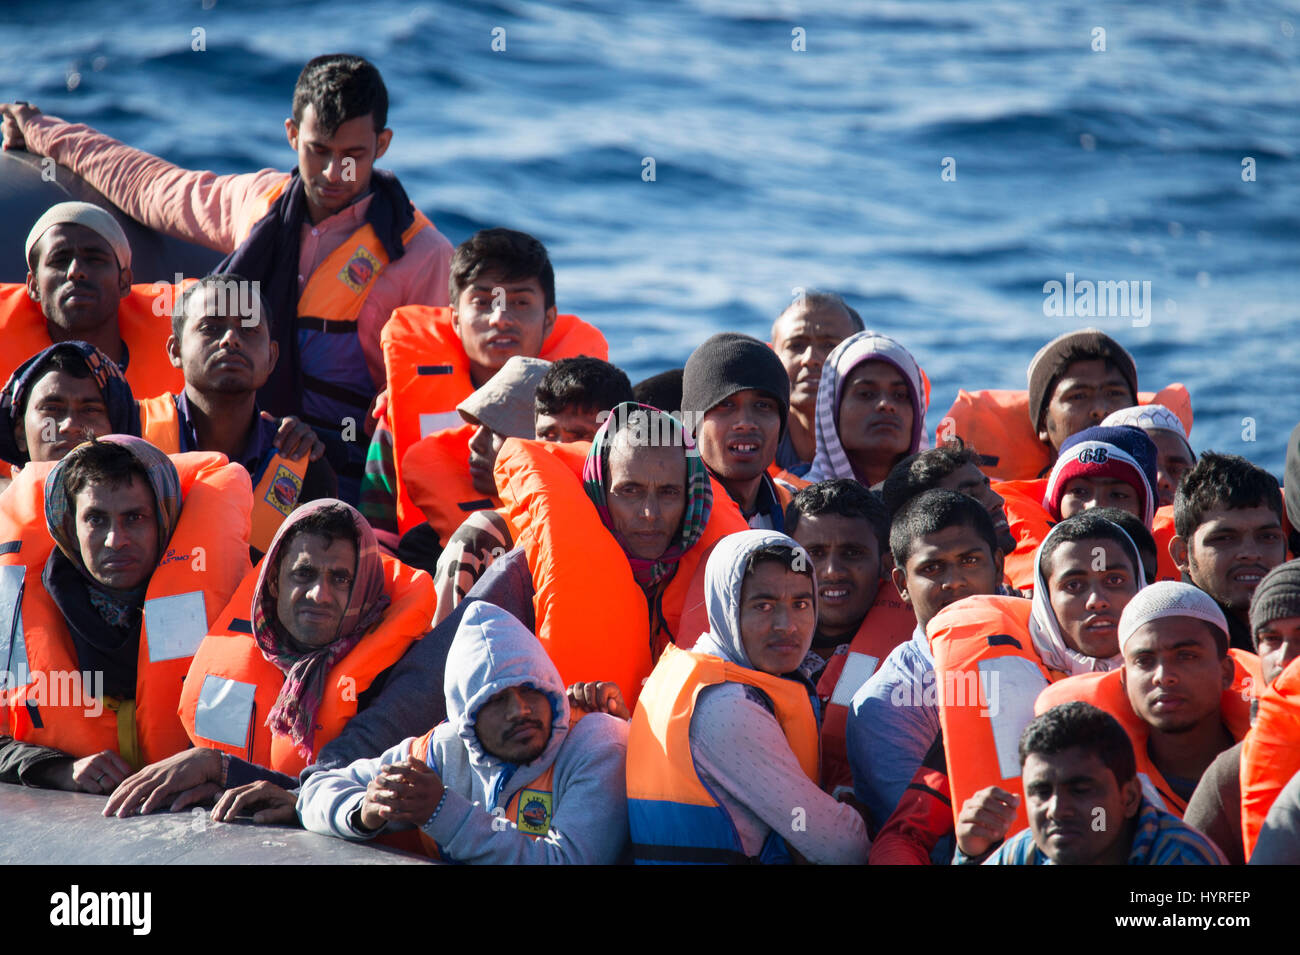 A non seaworthy rubberboat with around 150 people on board offshore Lybia trying to cross the mediterrean sea to europe. Because of the condition, whi Stock Photo